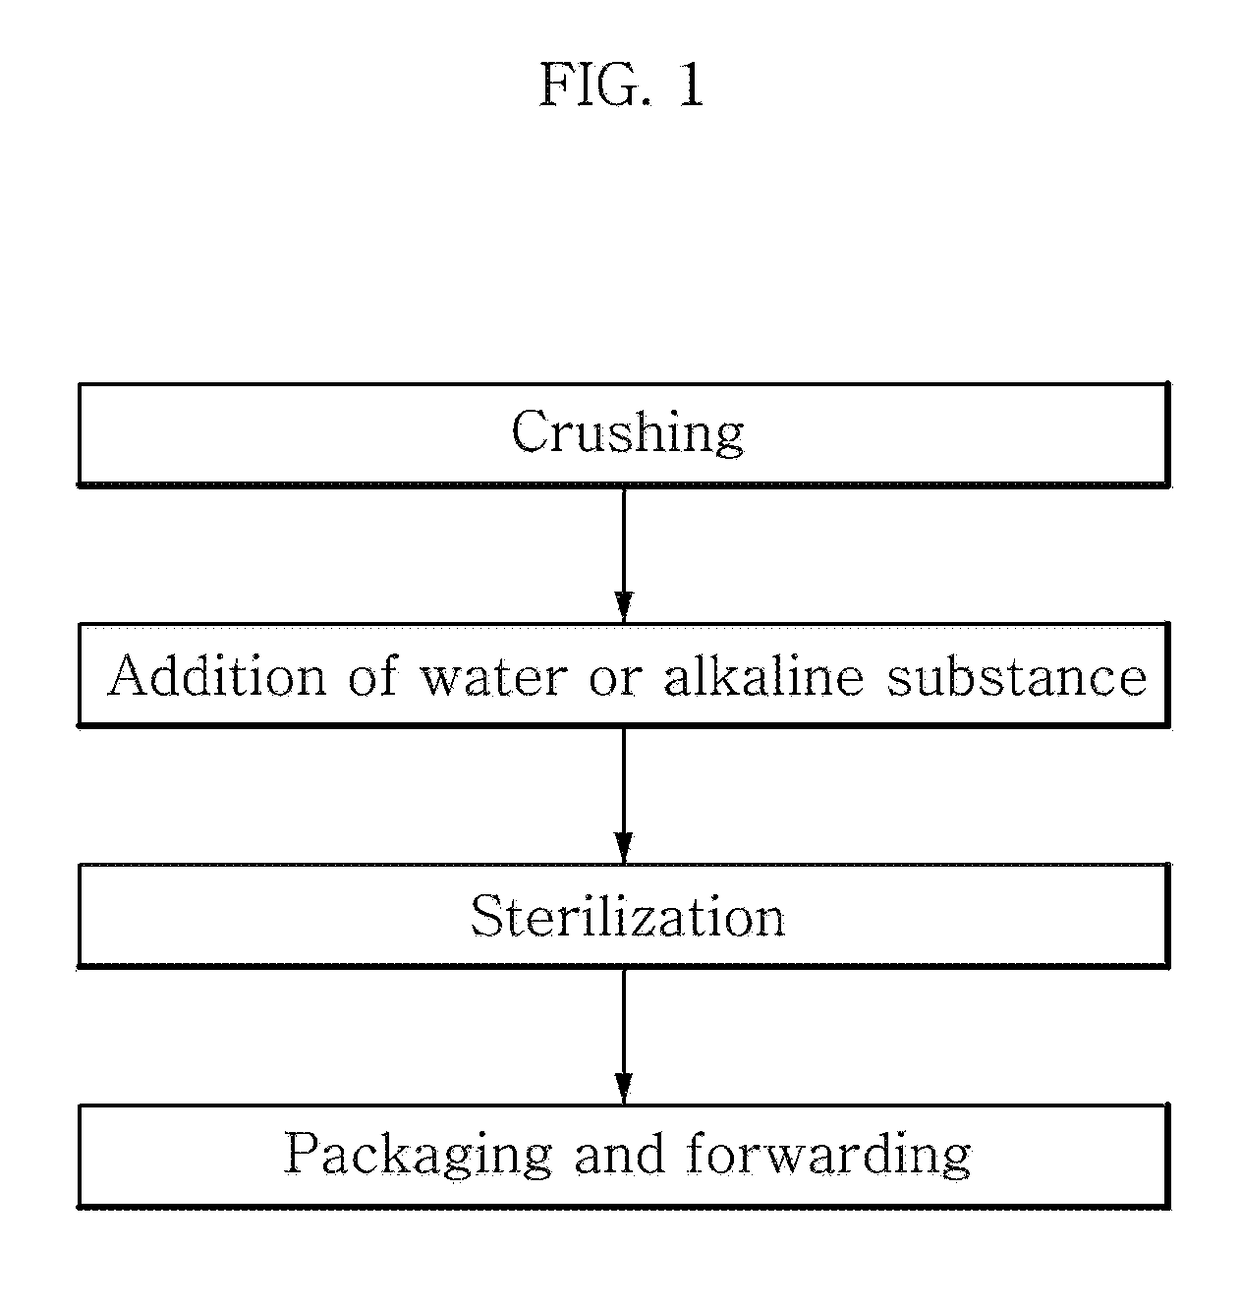 Method of manufacturing an amino-acid composition using animal by-products